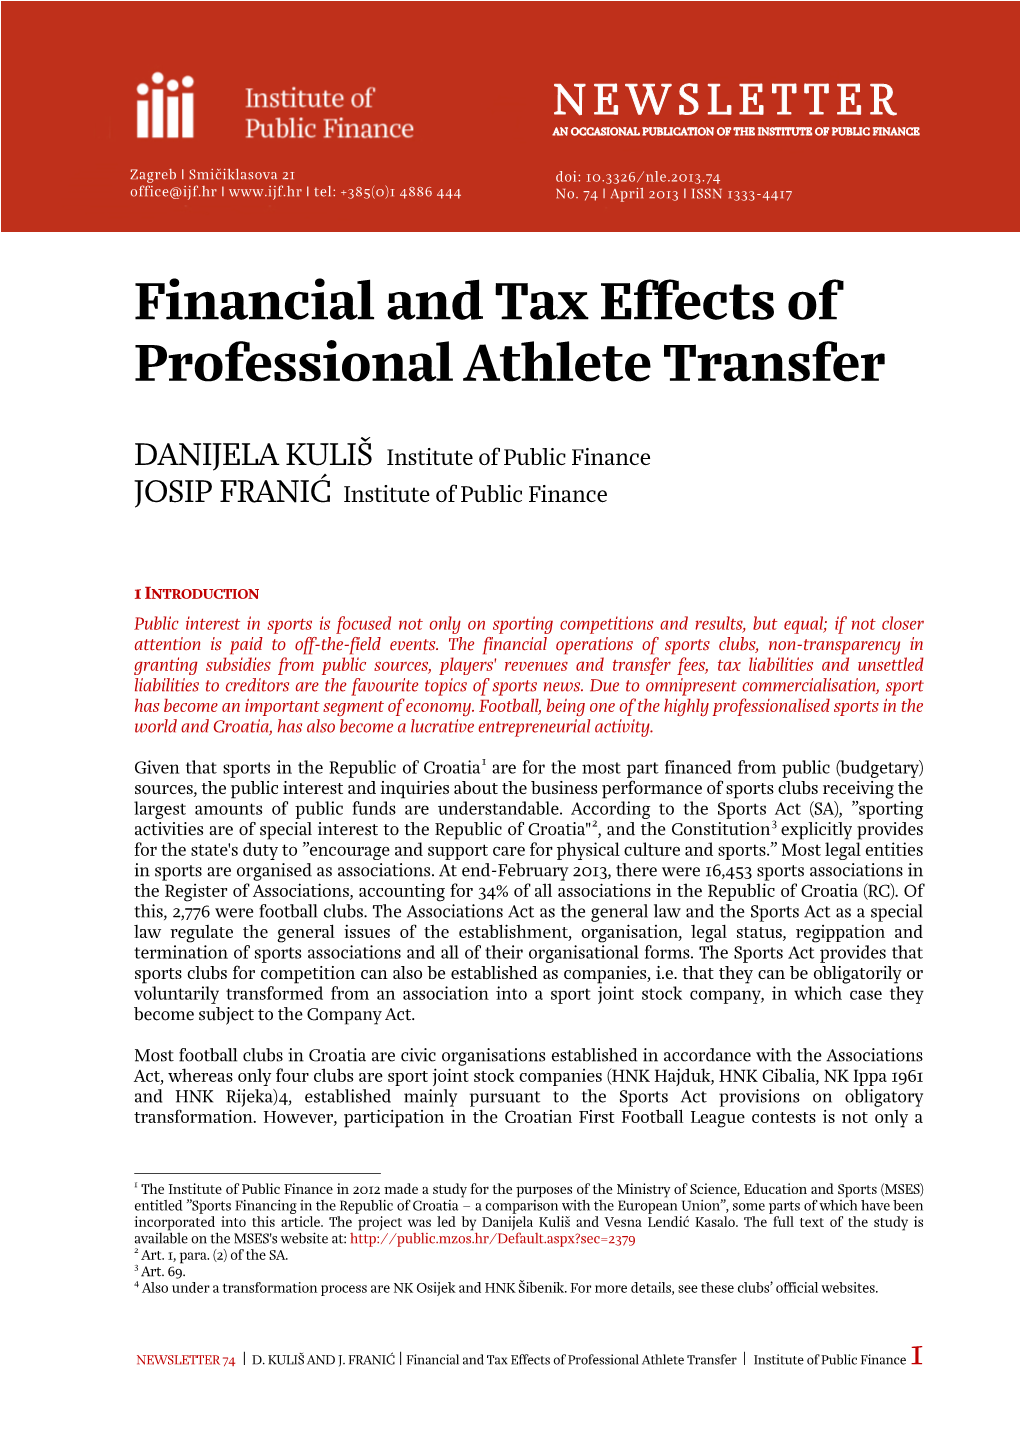 Financial and Tax Effects of Professional Athlete Transfer